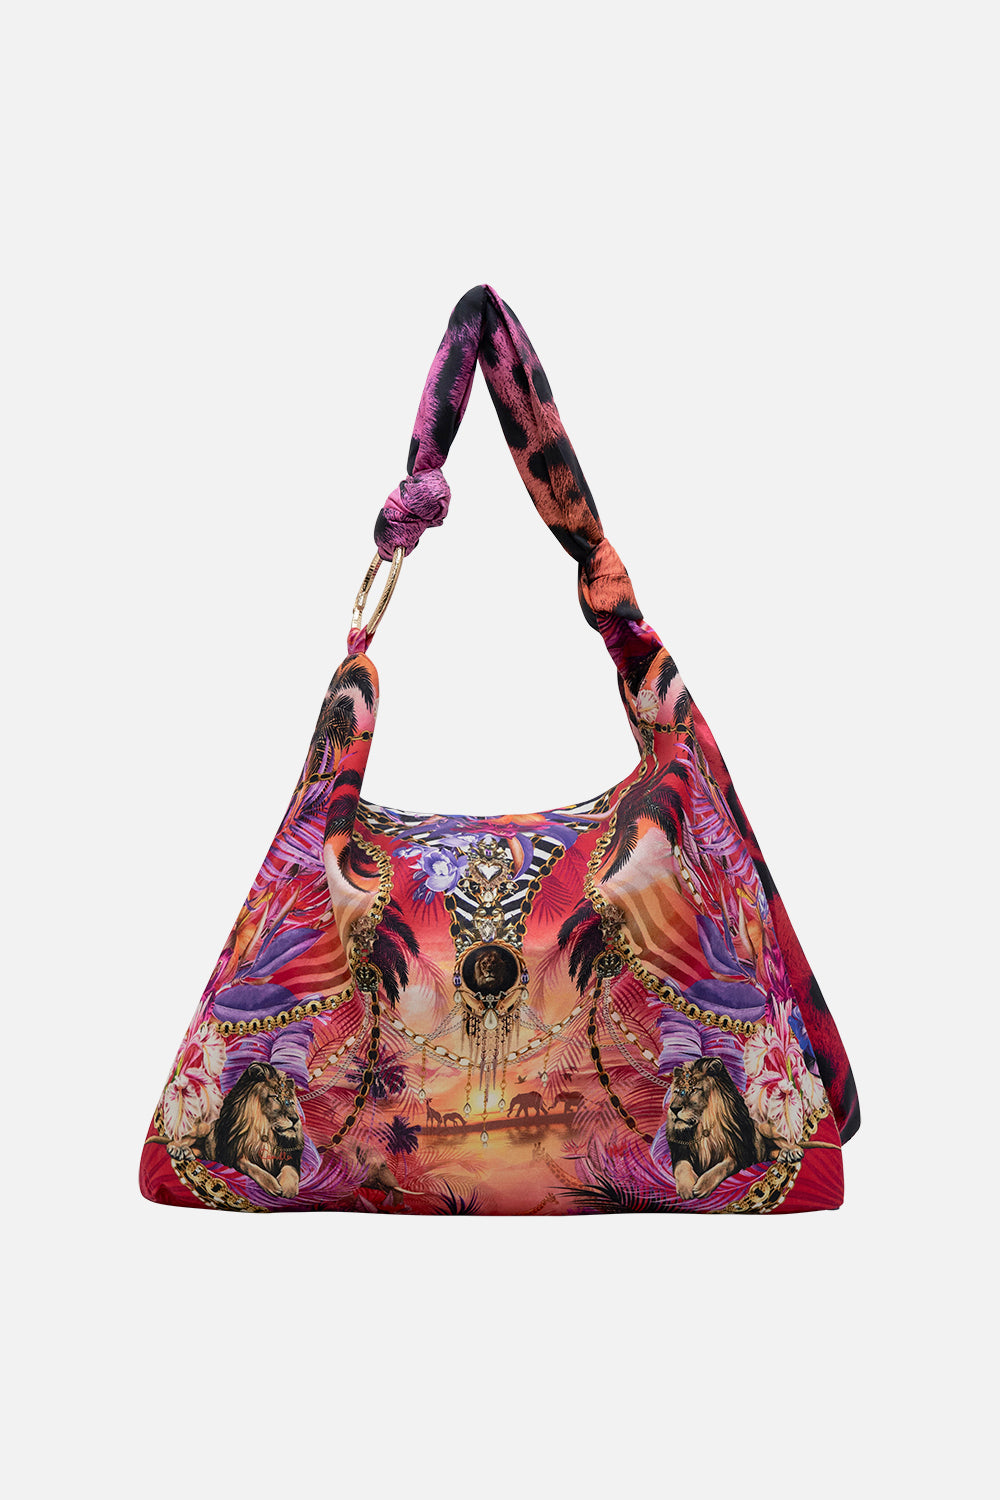 Back product view of CAMILLA Beach Bag in Wild Loving print